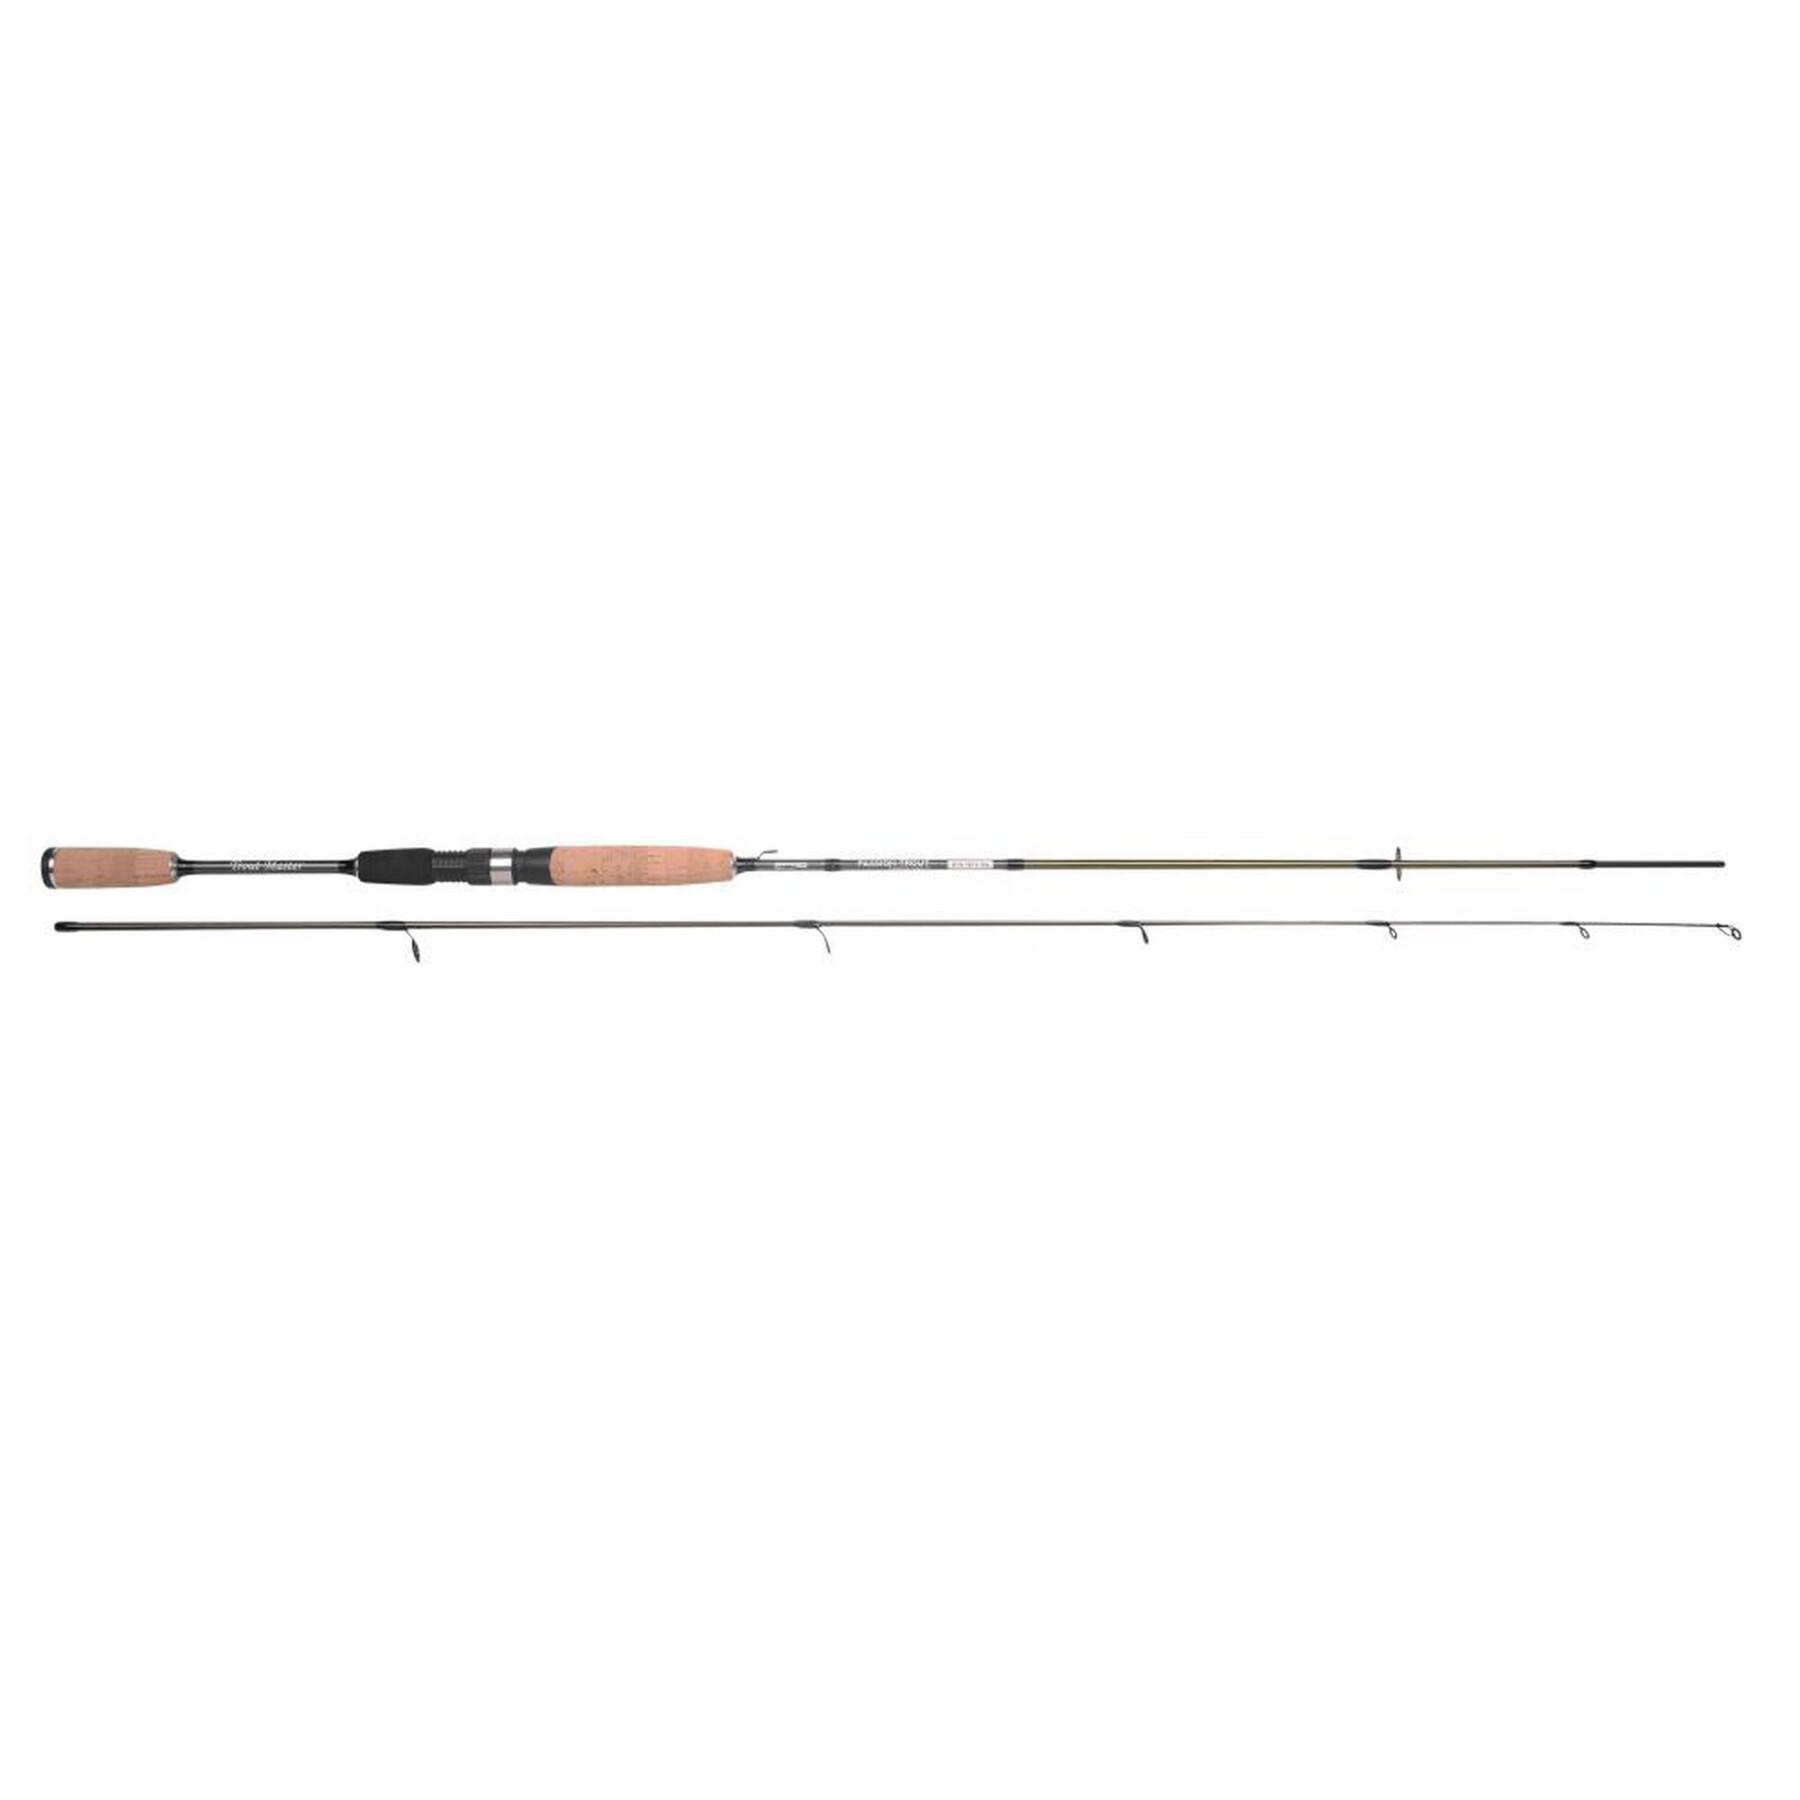 Canna da spinning Spro passion trout 3-10g